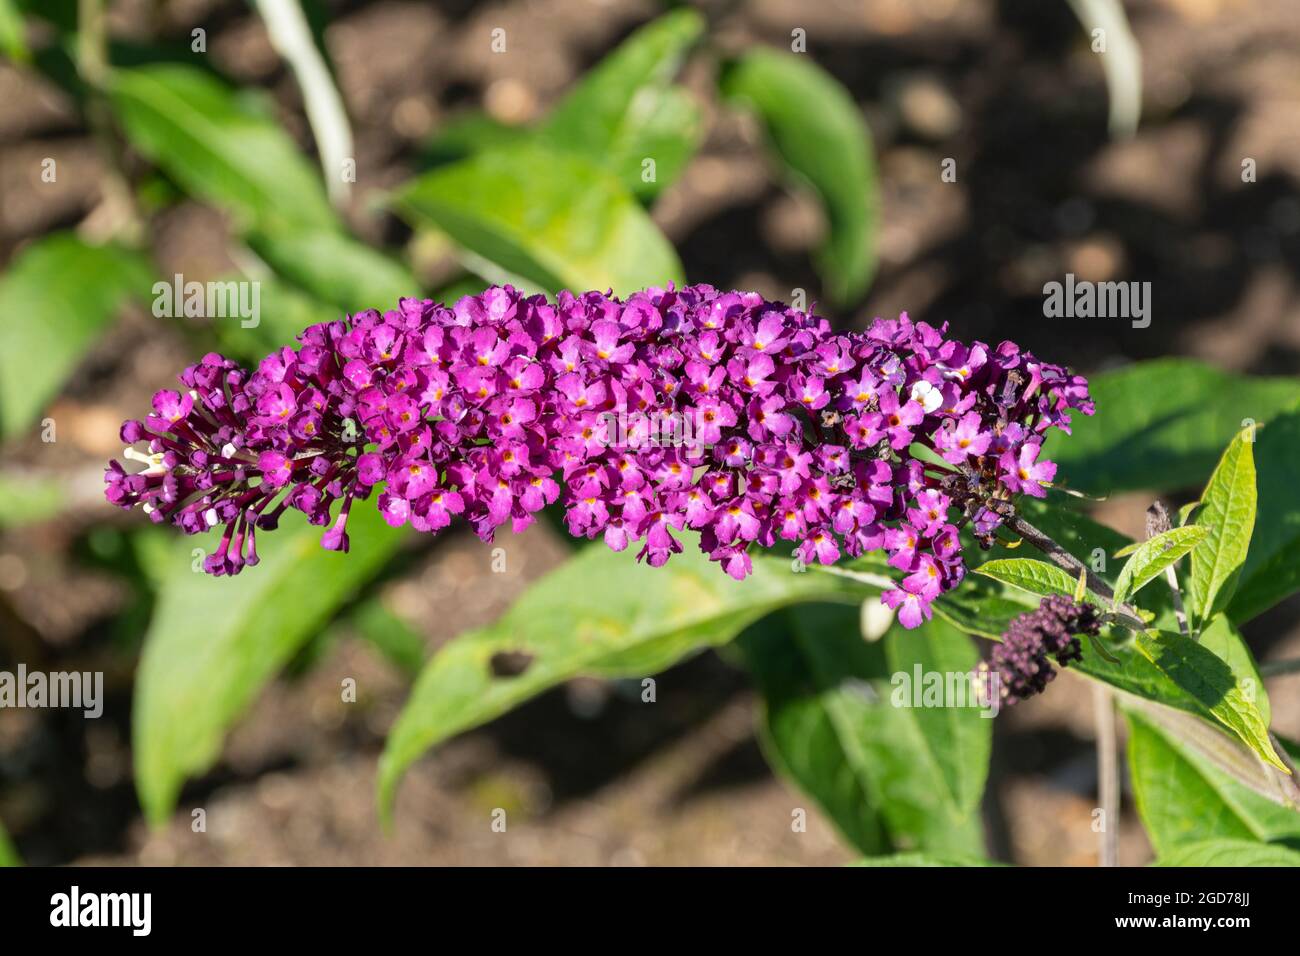 Buddleia davidii 'Berries and Cream' (buddleja variety), known as a butterfly bush, in flower during august or summer, UK Stock Photo